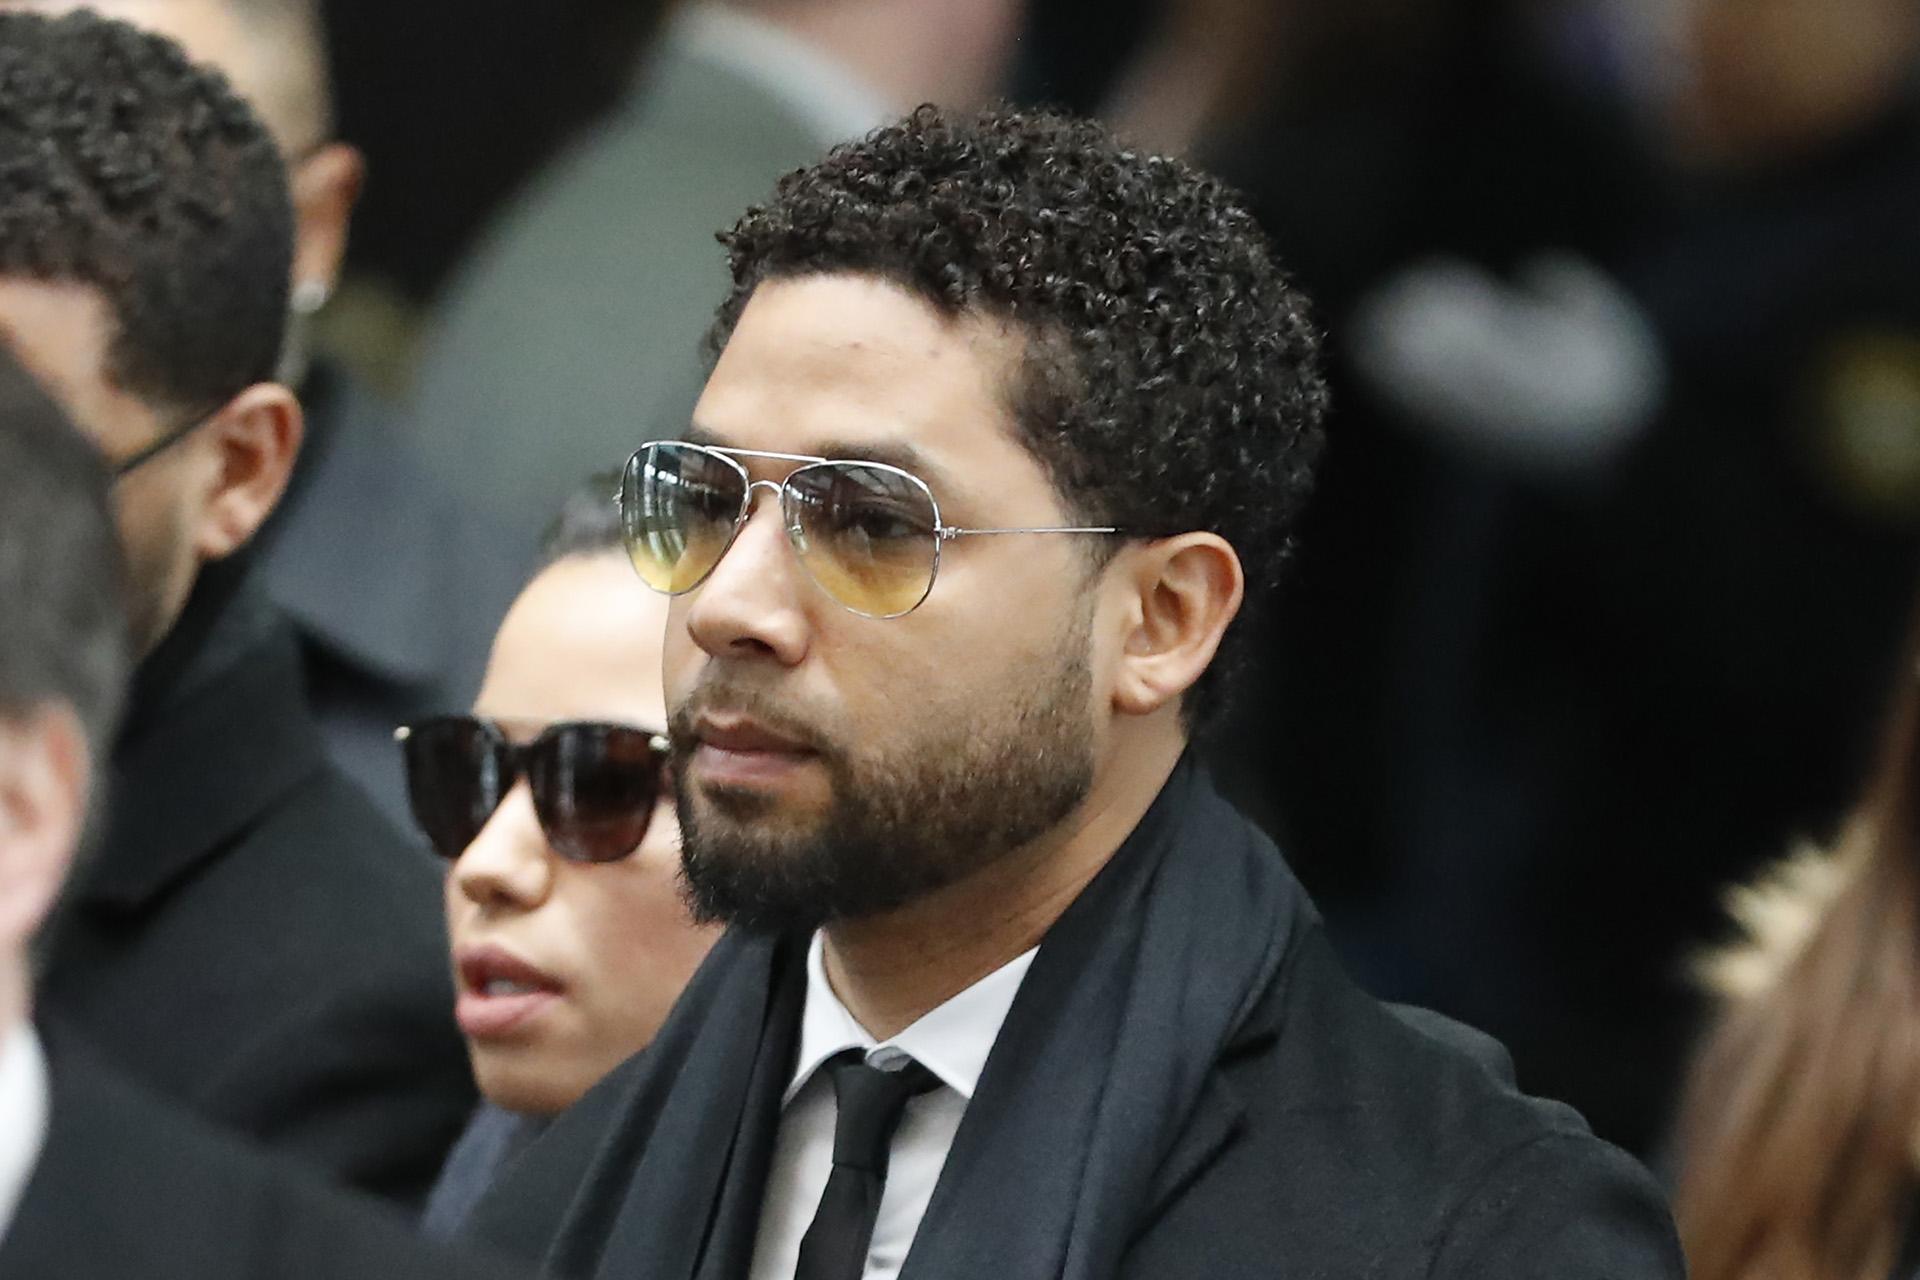 Former “Empire” actor Jussie Smollett, center, arrives for an initial court appearance Monday, Feb. 24, 2020, at the Leighton Criminal Courthouse in Chicago, on a new set of charges alleging that he lied to police about being targeted in a racist and homophobic attack in downtown Chicago early last year.  (AP Photo / Charles Rex Arbogast)